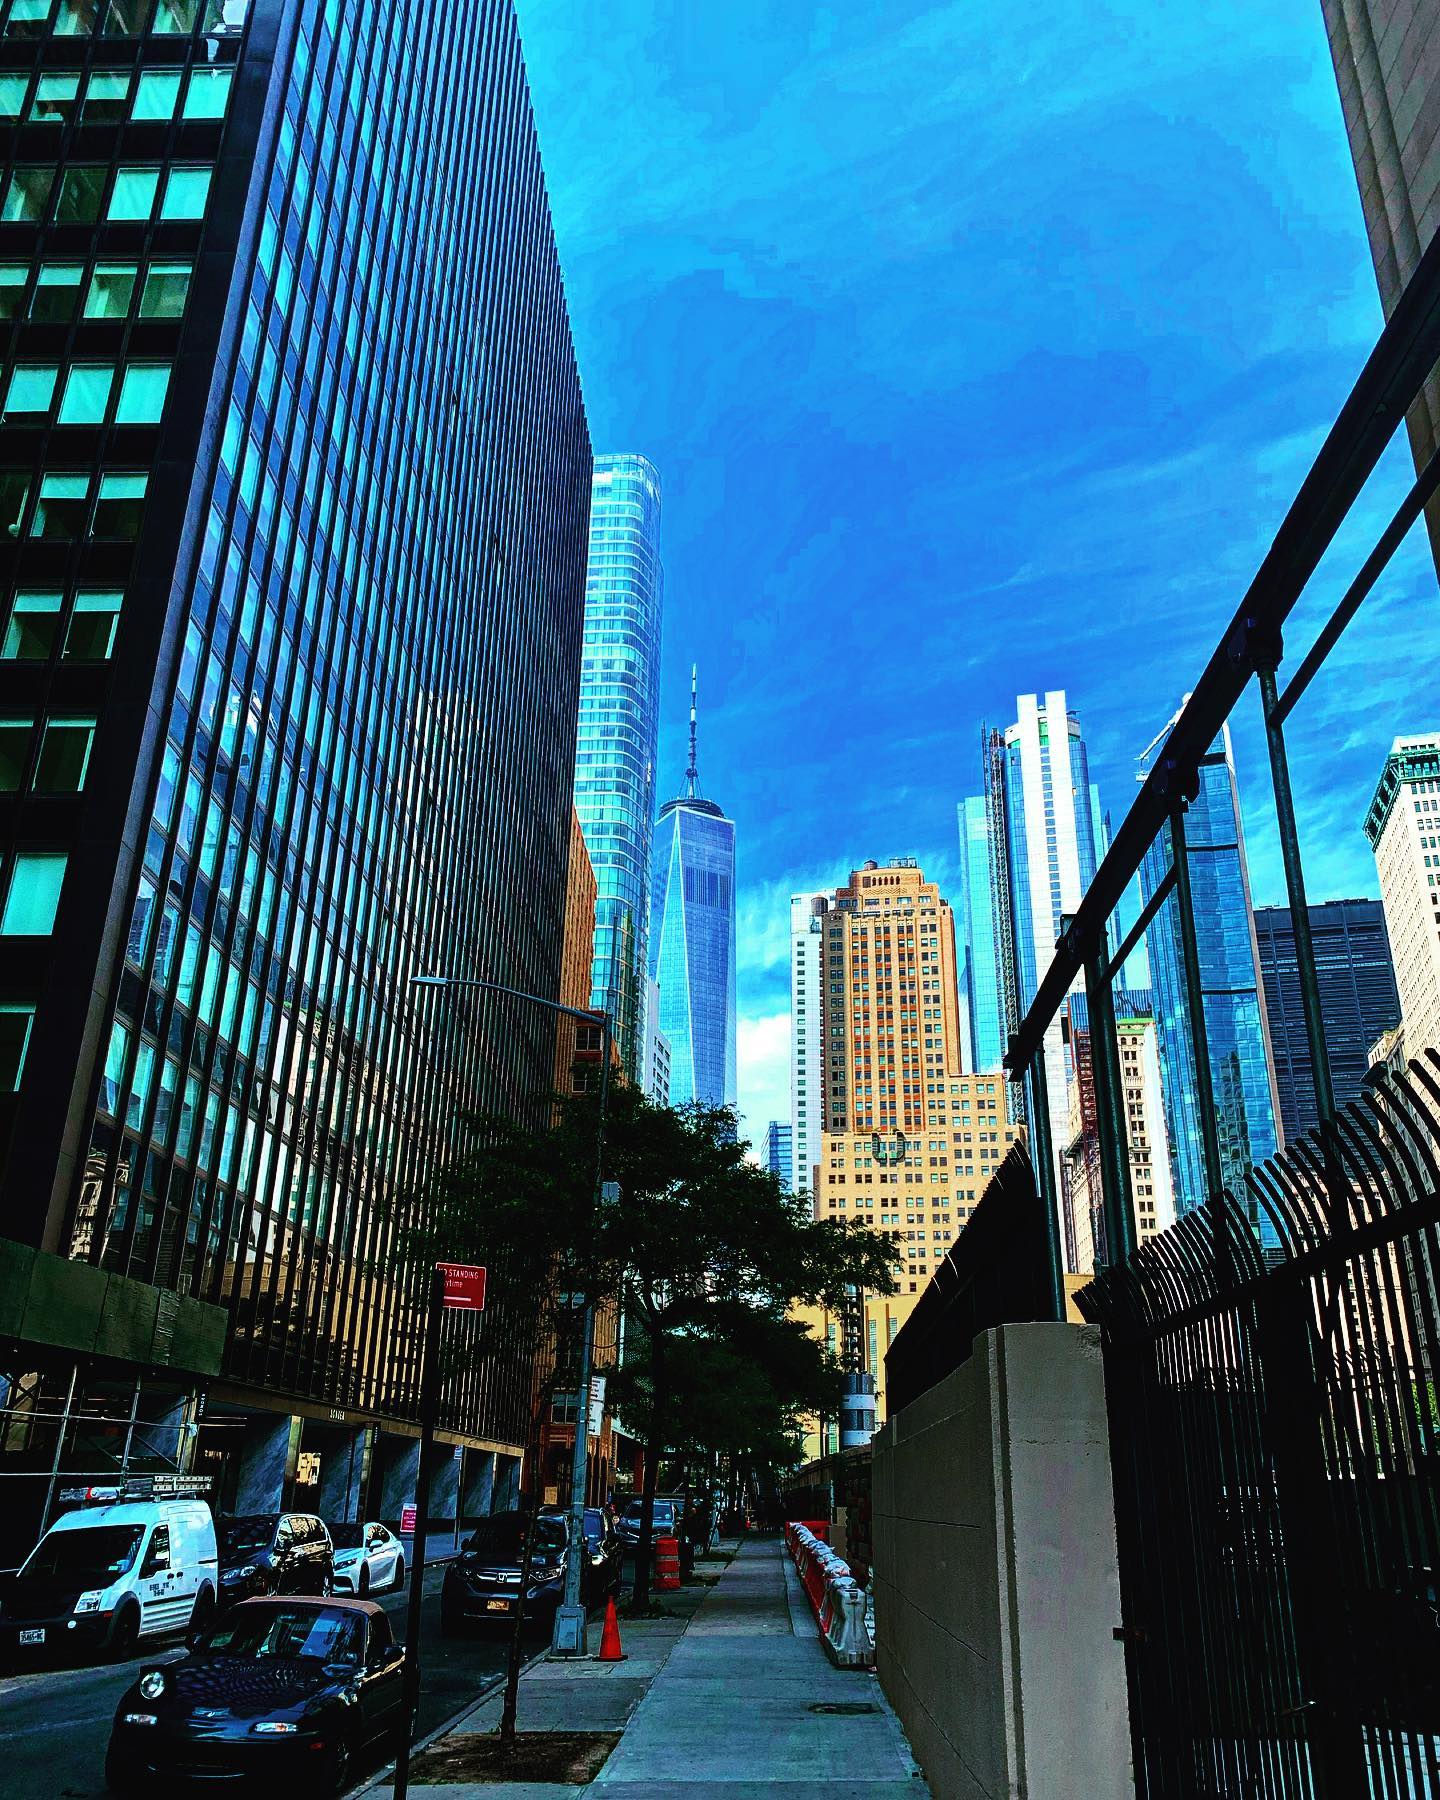 Loving #fidi everyday
.
.
.
#wtc #freedomtower #downtown #fidi #financialdistrict #office #building #officespace #officesuite #soho #nyc